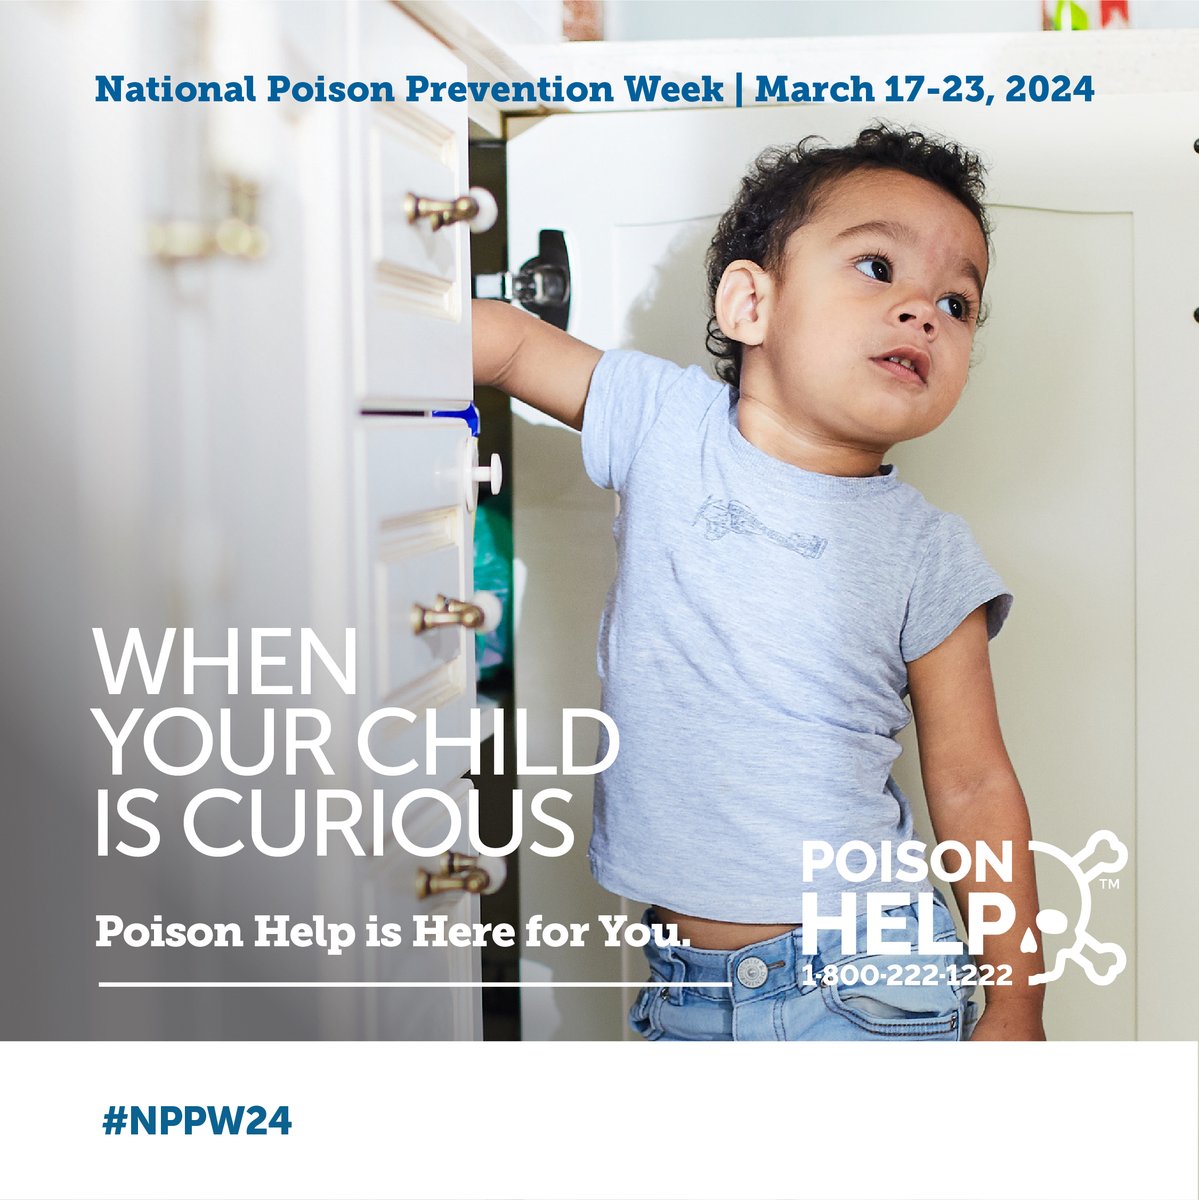 As national poison prevention week comes to an end, #beprepared save the poison help line in your phone: 1-800-222-1222 and take measures to keep common poisons out of kids reach both at home and at your childcare facility.

aapcc.org

#NPPW24 #childhoodpreparedness